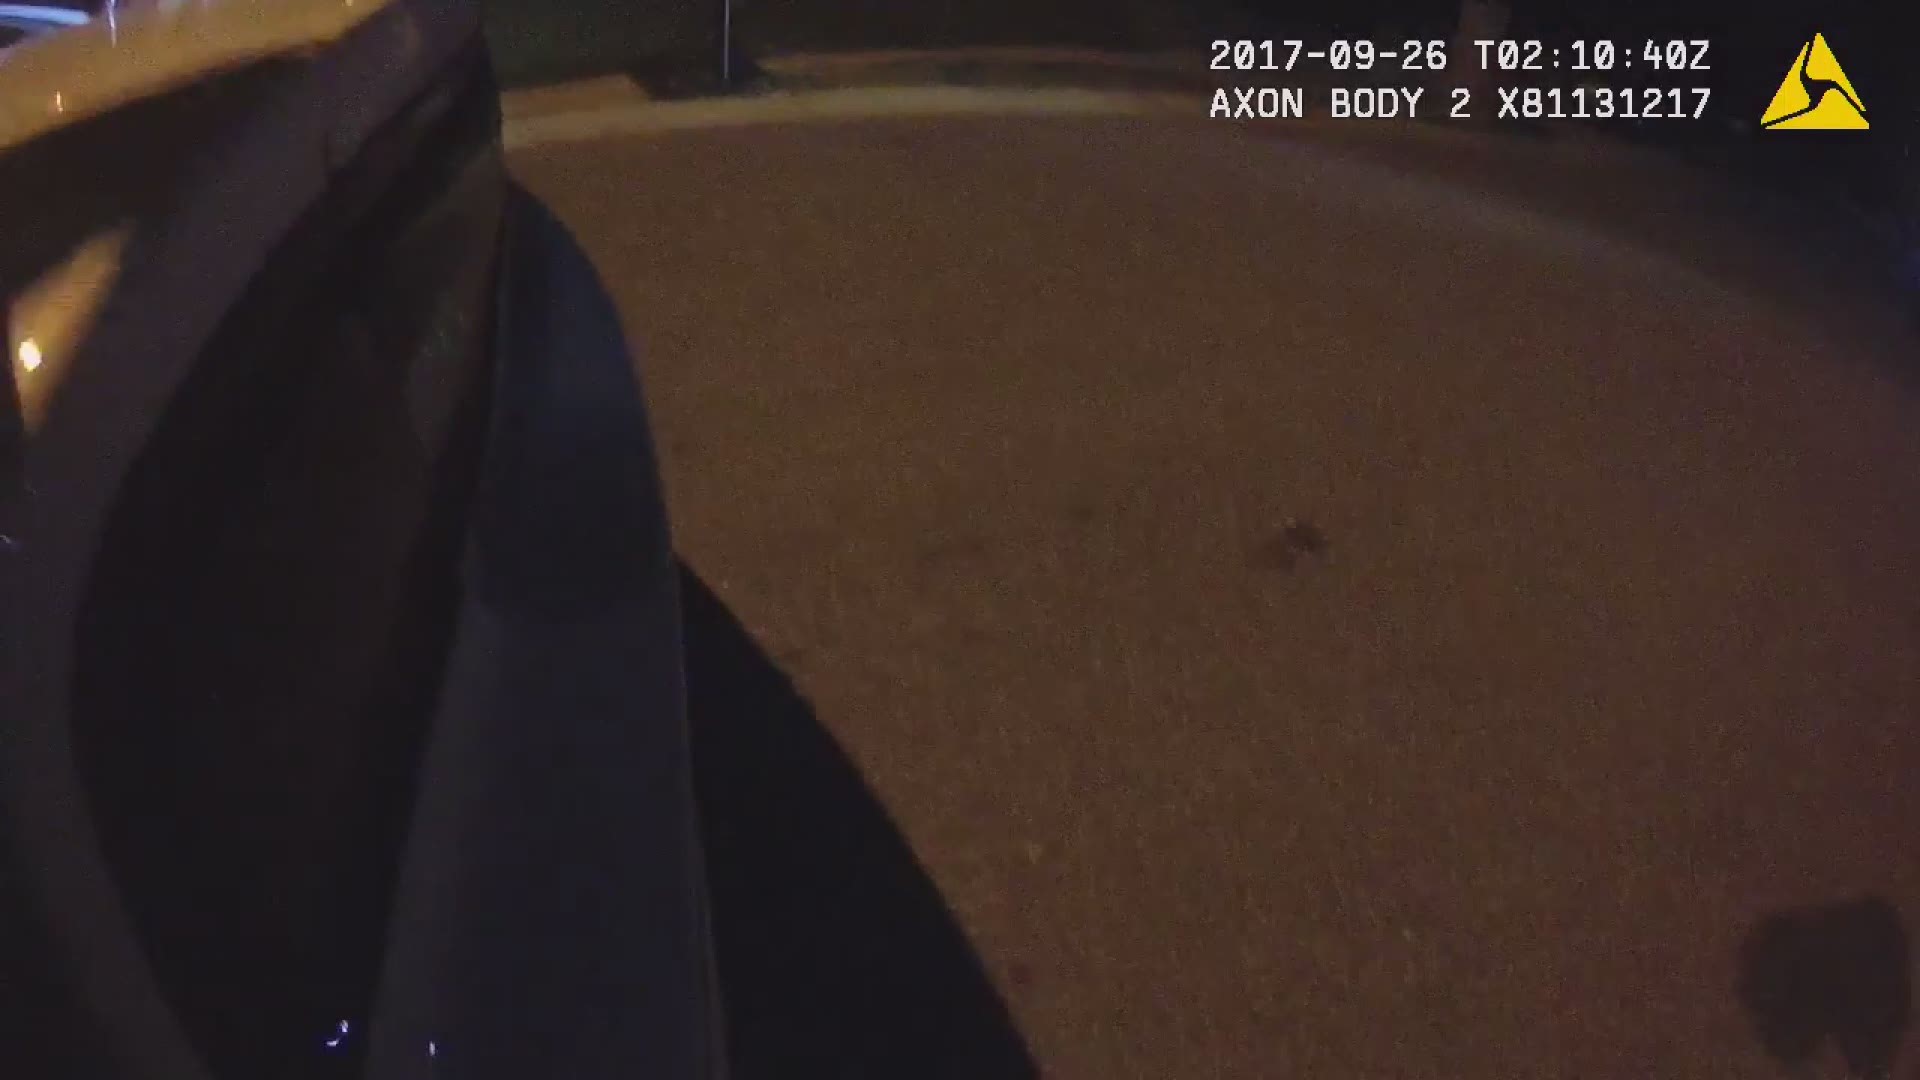 Charlotte-Mecklenburg Police released the body cam footage of the officer-involved shooting that took place in September 2017.